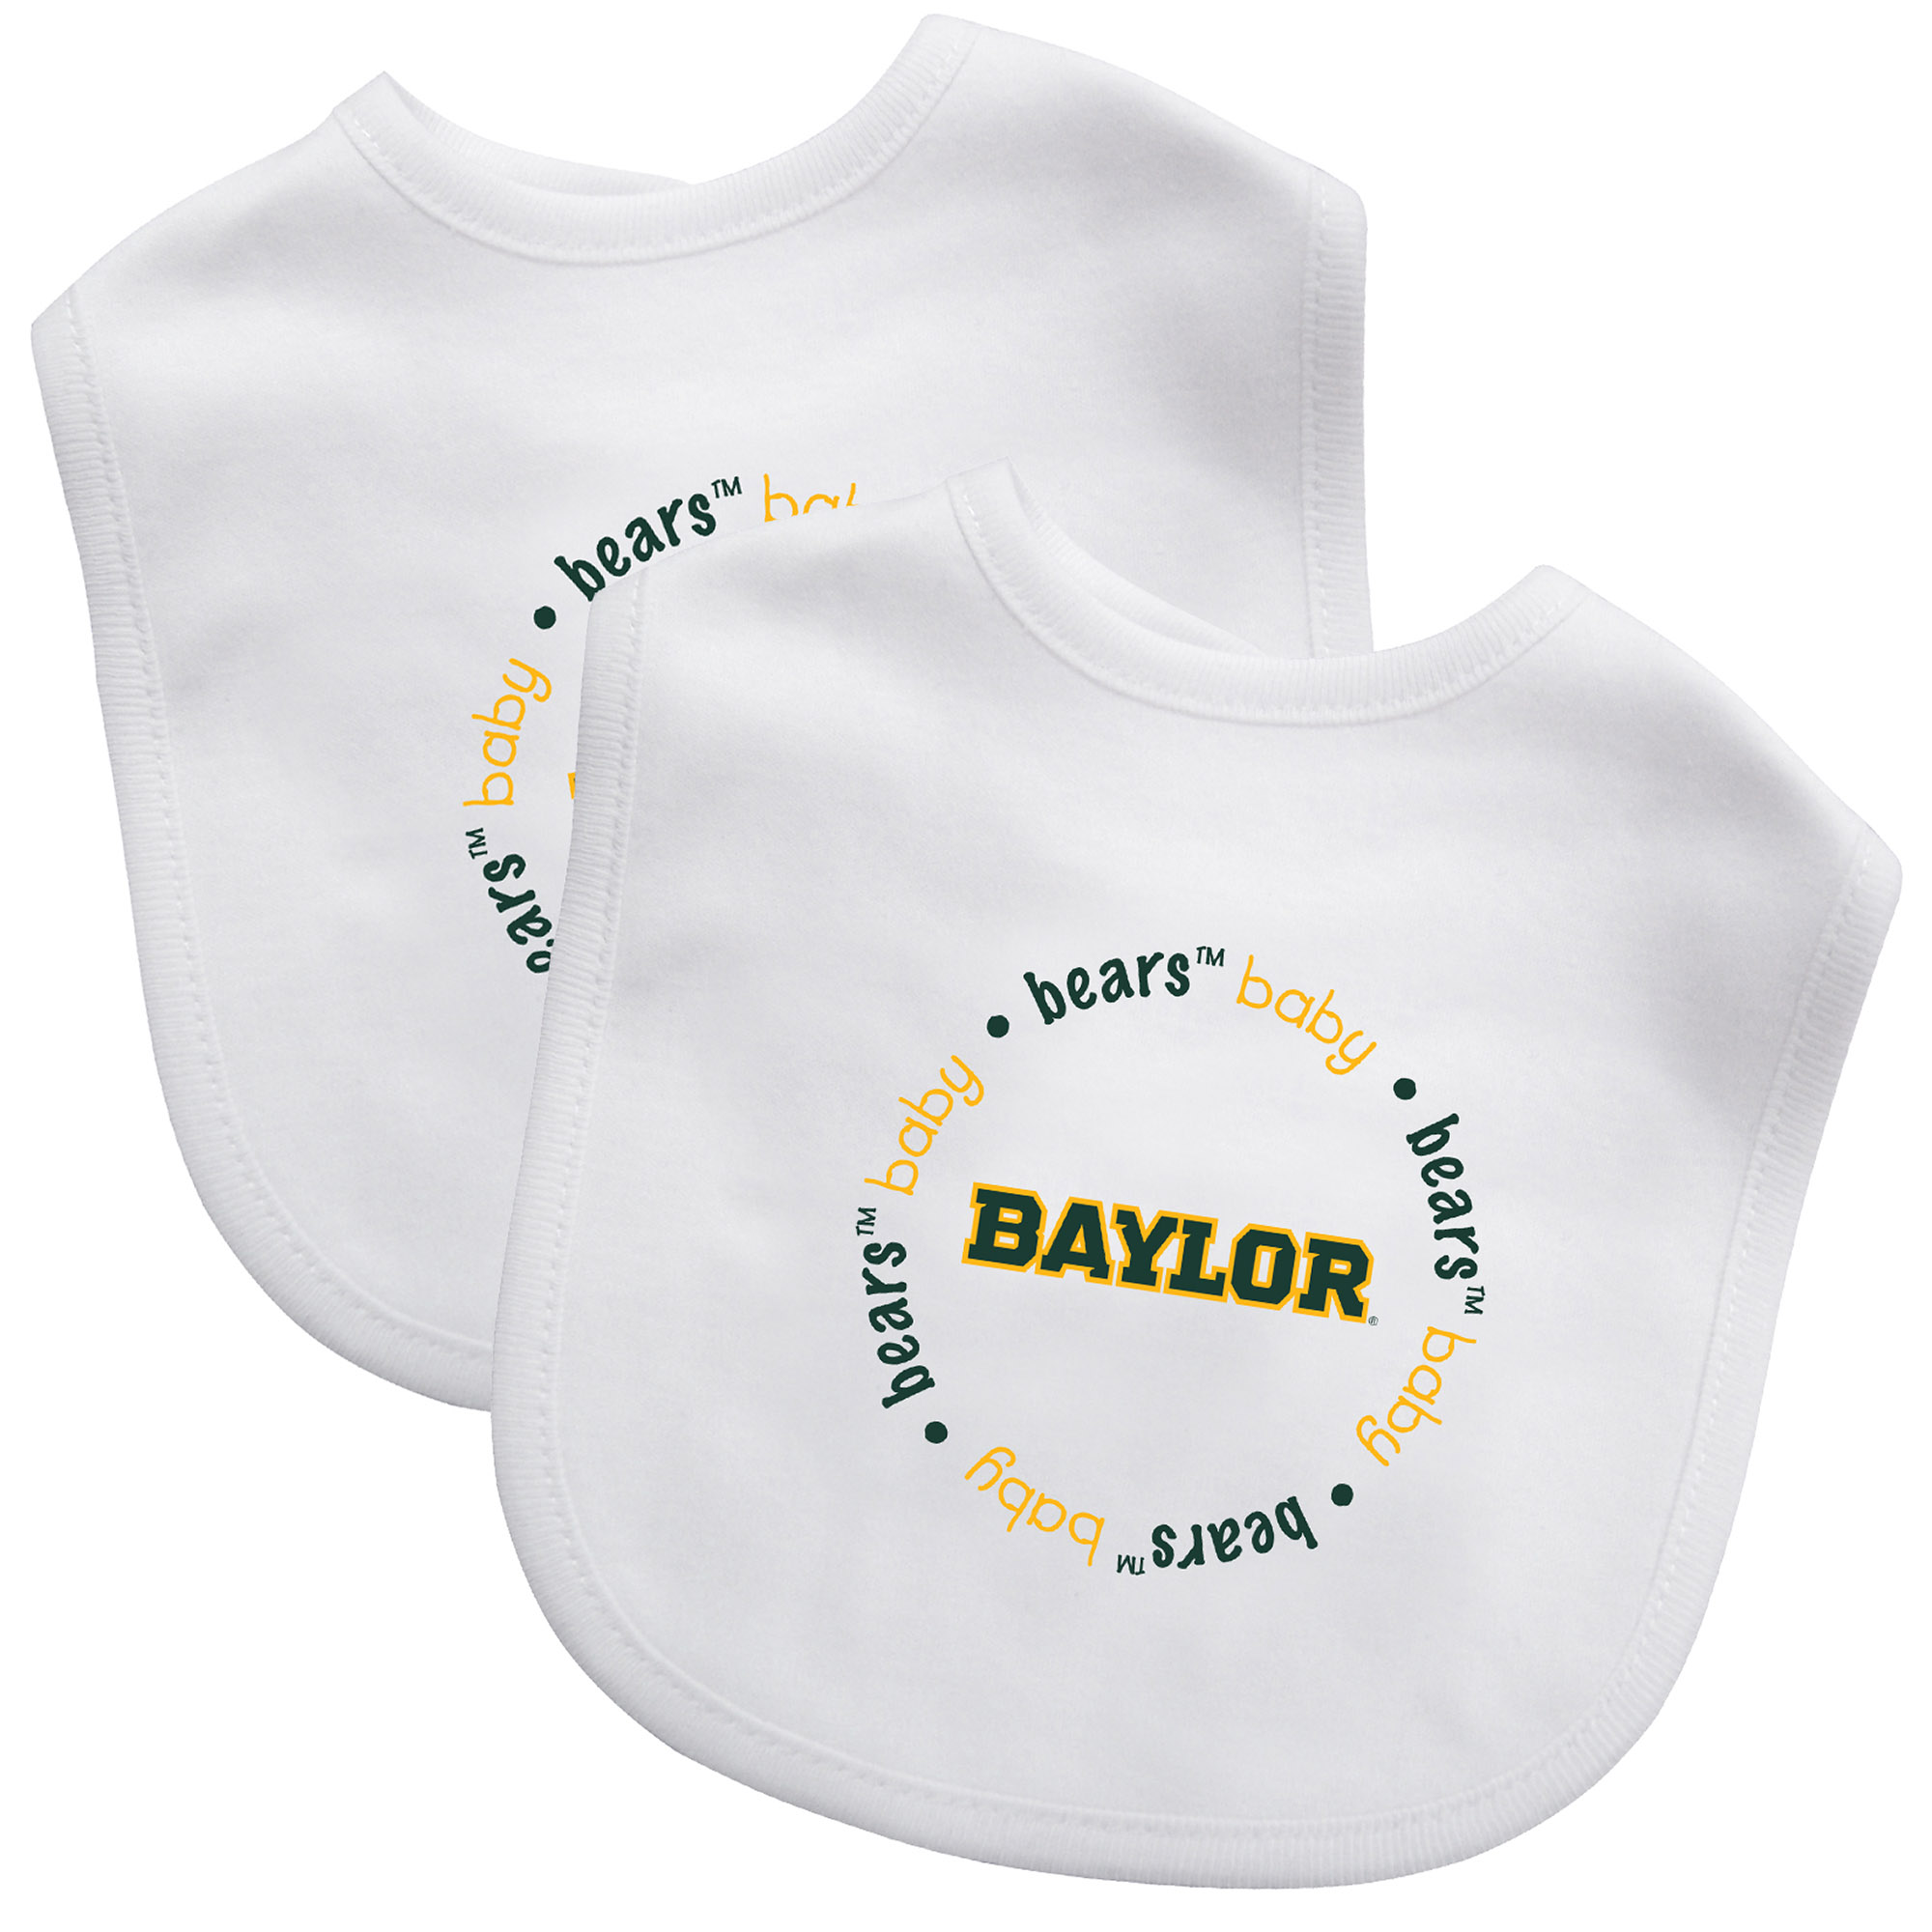 BabyFanatic Officially Licensed Unisex Baby Bibs 2 Pack - NCAA Baylor Bears - image 1 of 3